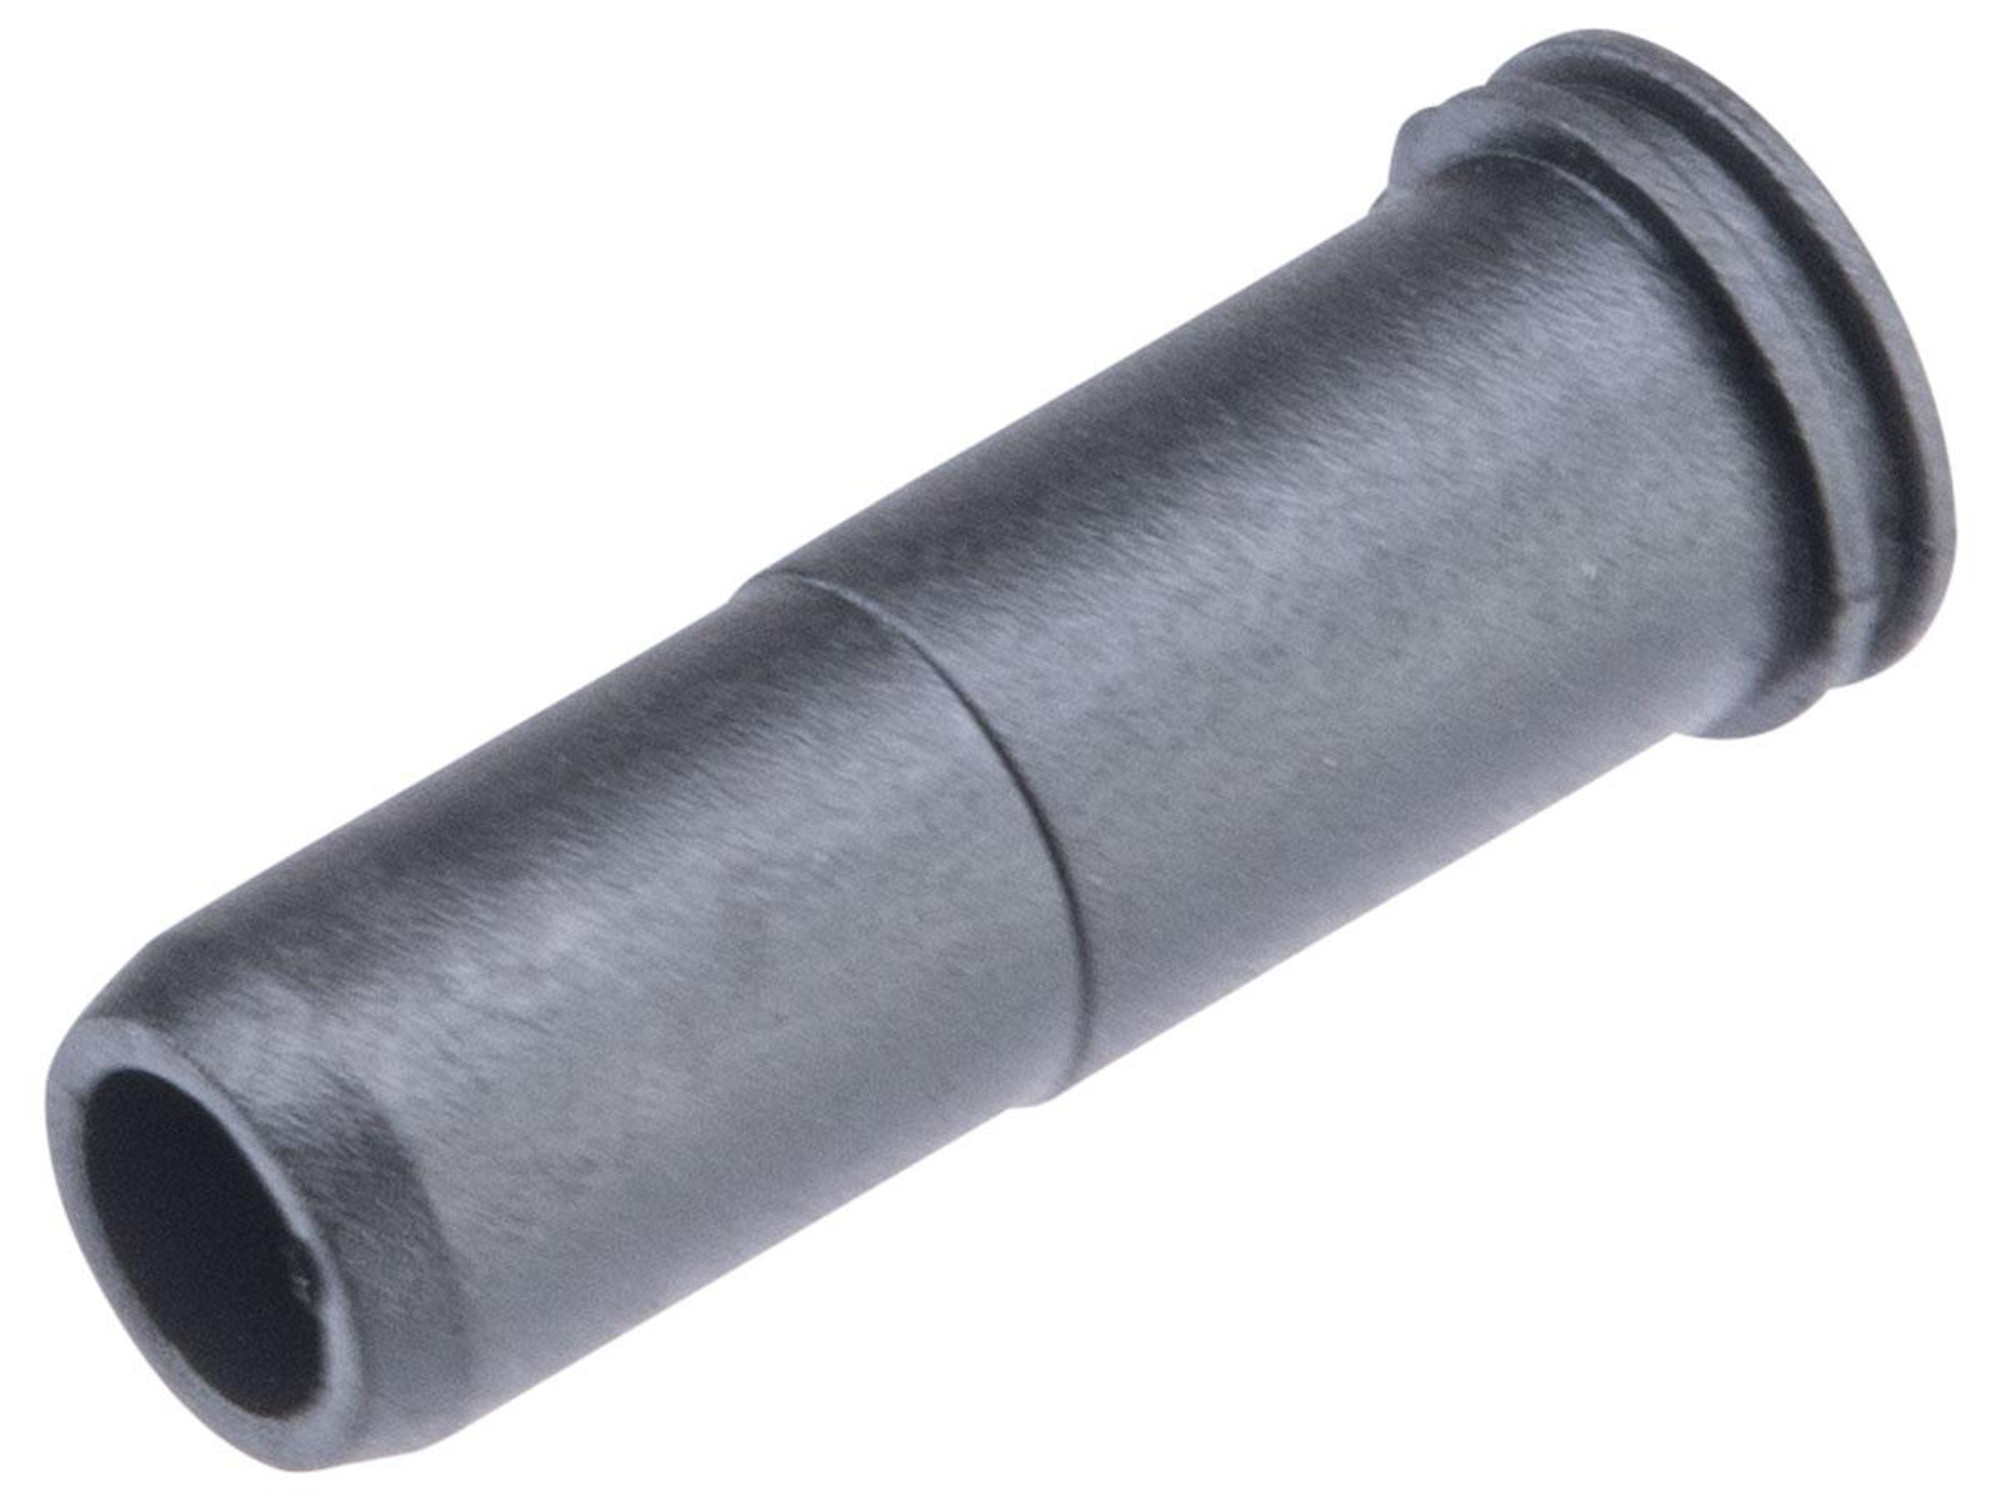 Classic Army Replacement Air Nozzle for M14 Airsoft AEG Gearboxes